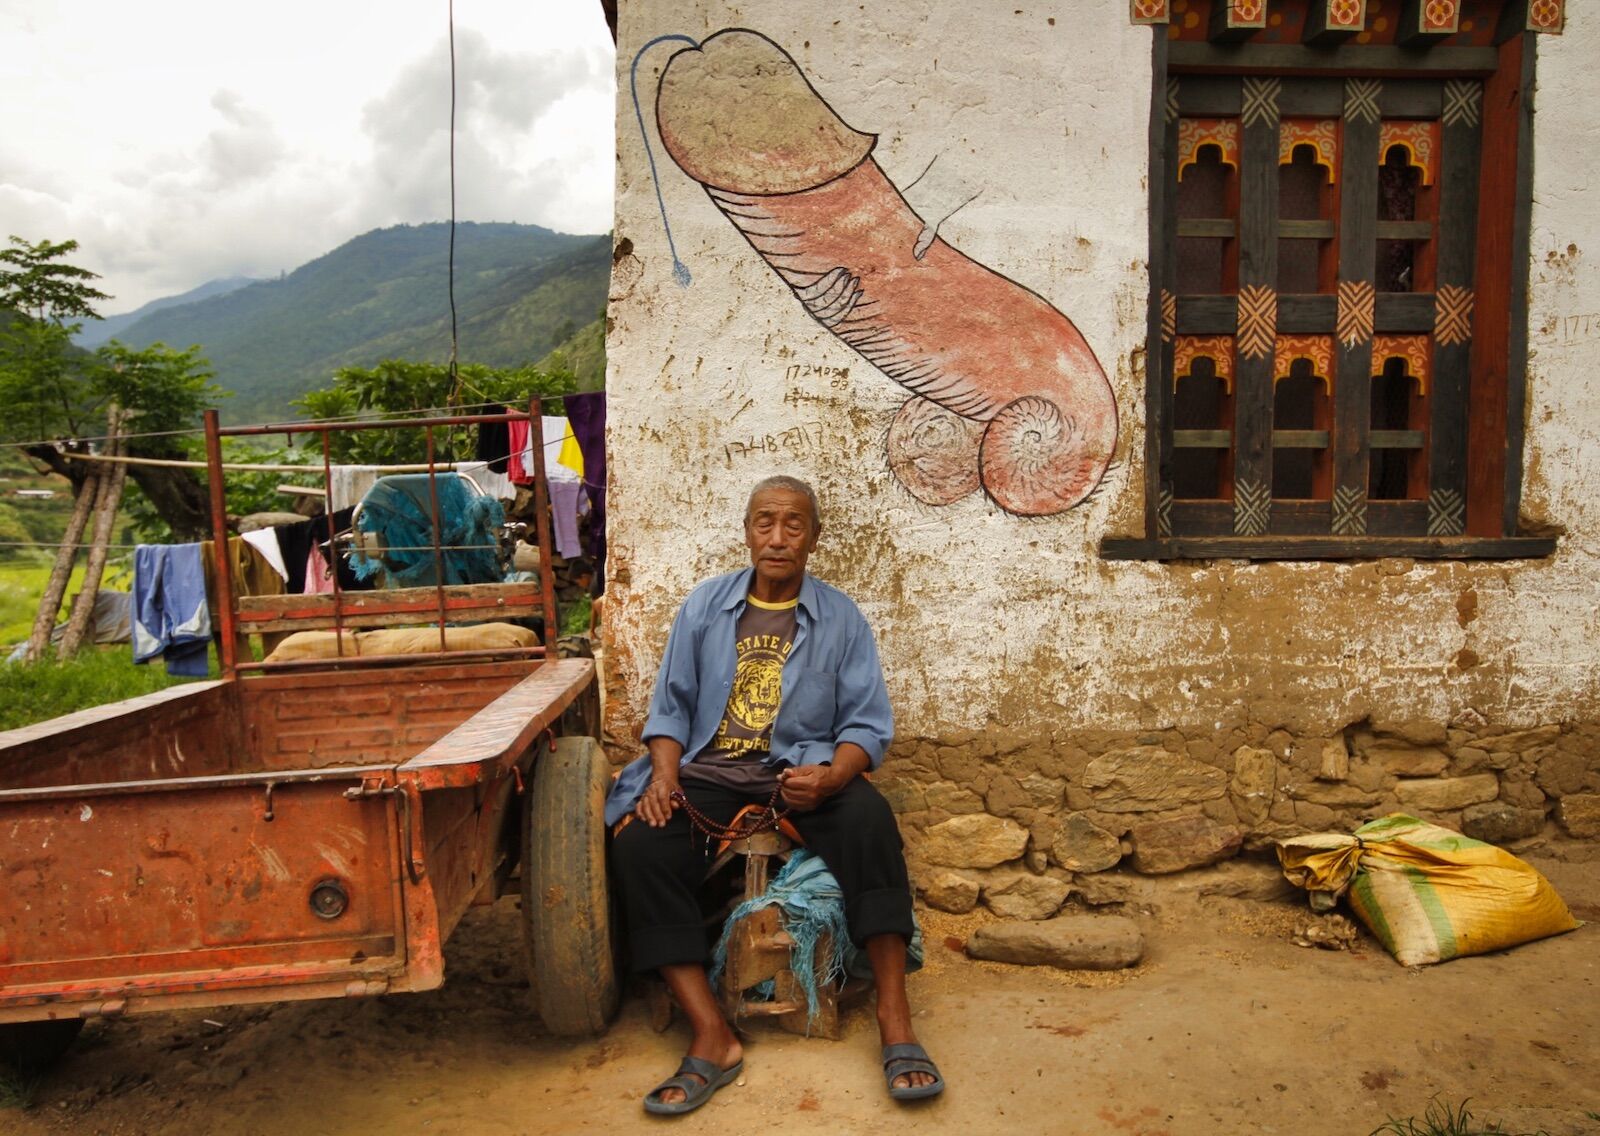 Man sitting under the painting of a penis in Bhutan